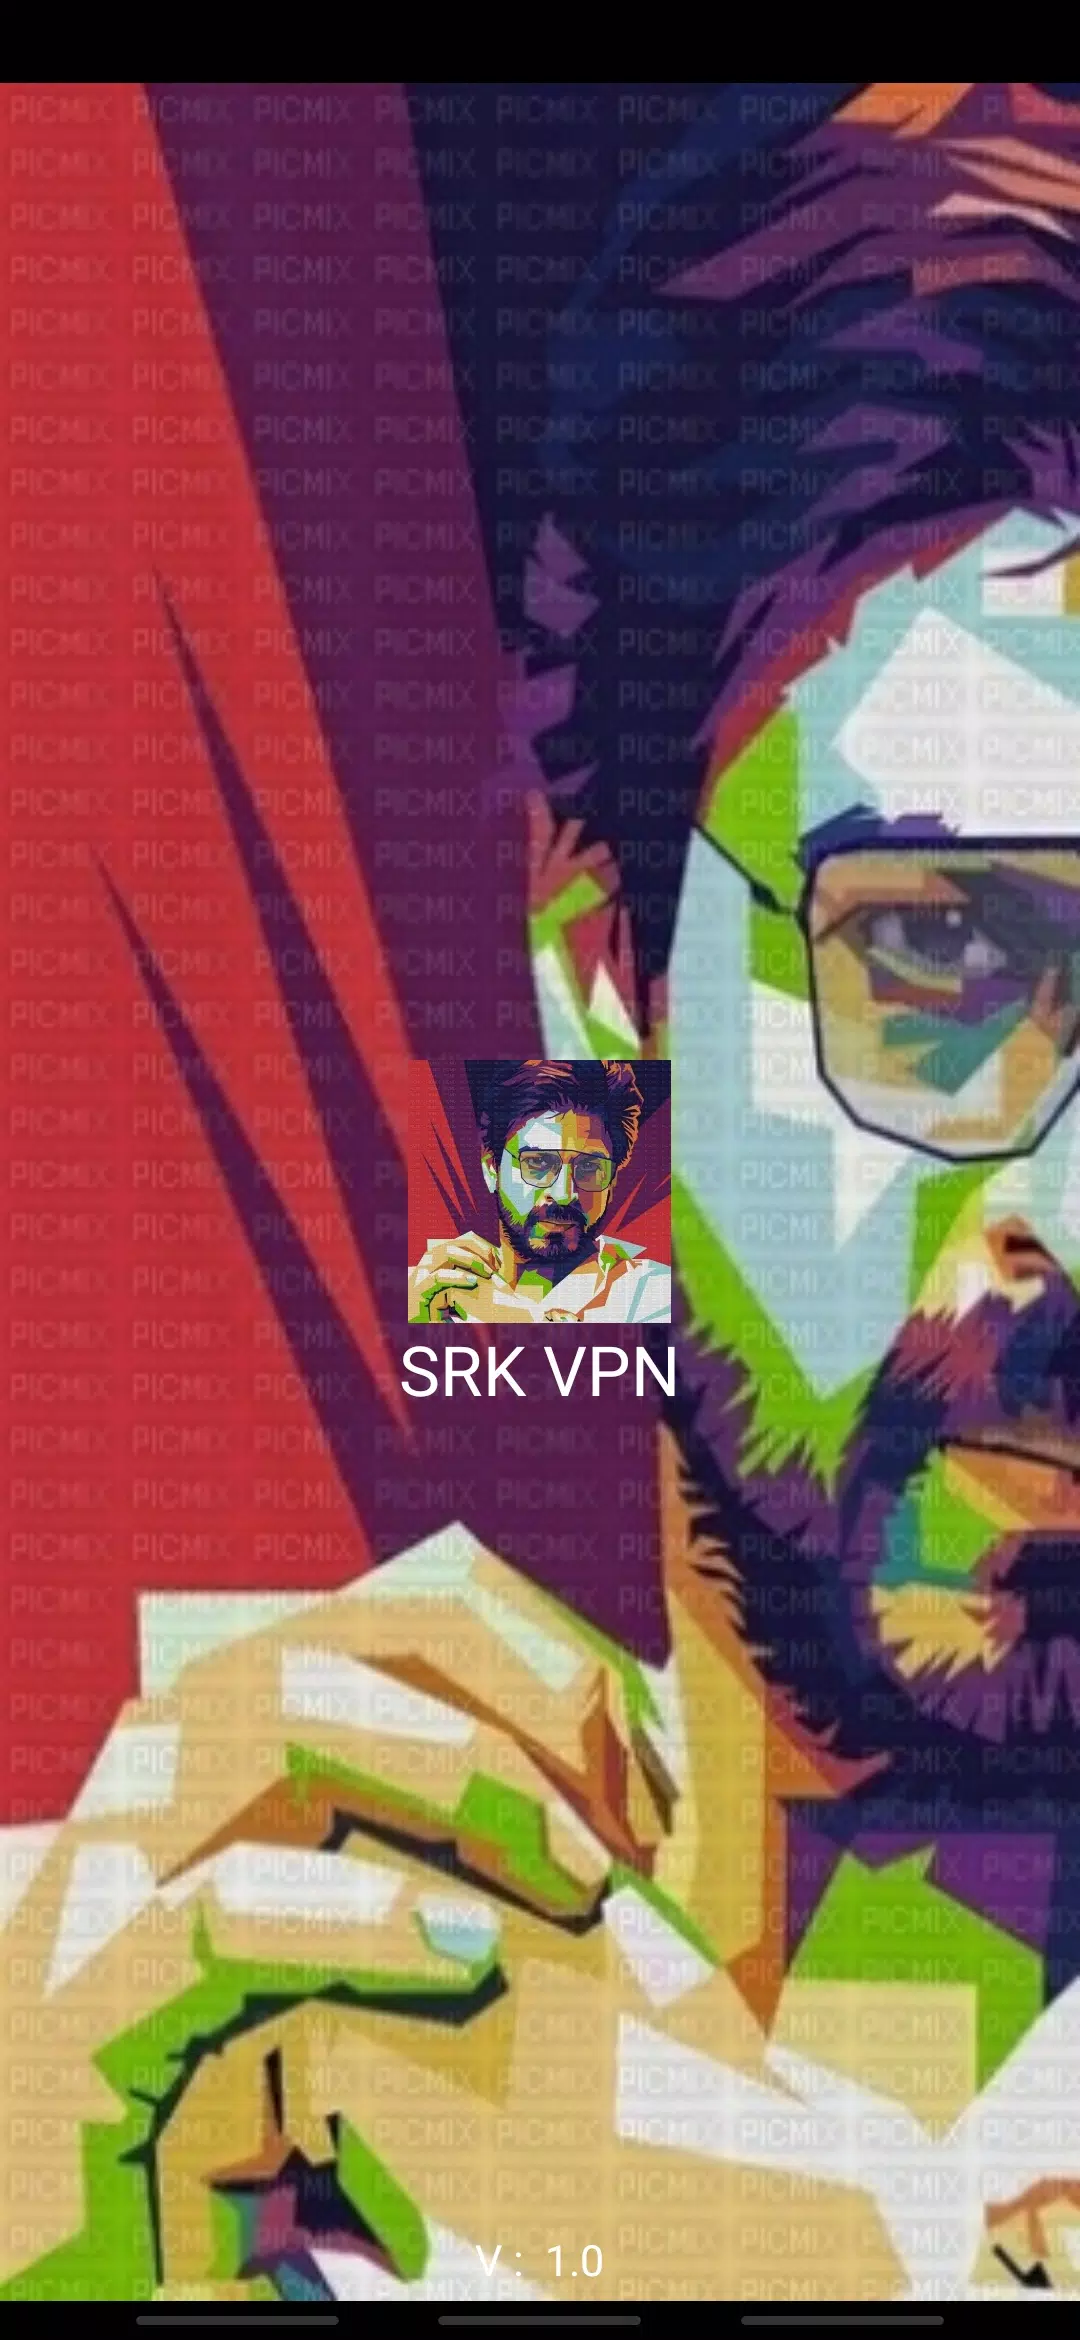 SRK keyboard (Pathaan Special) - Apps on Google Play